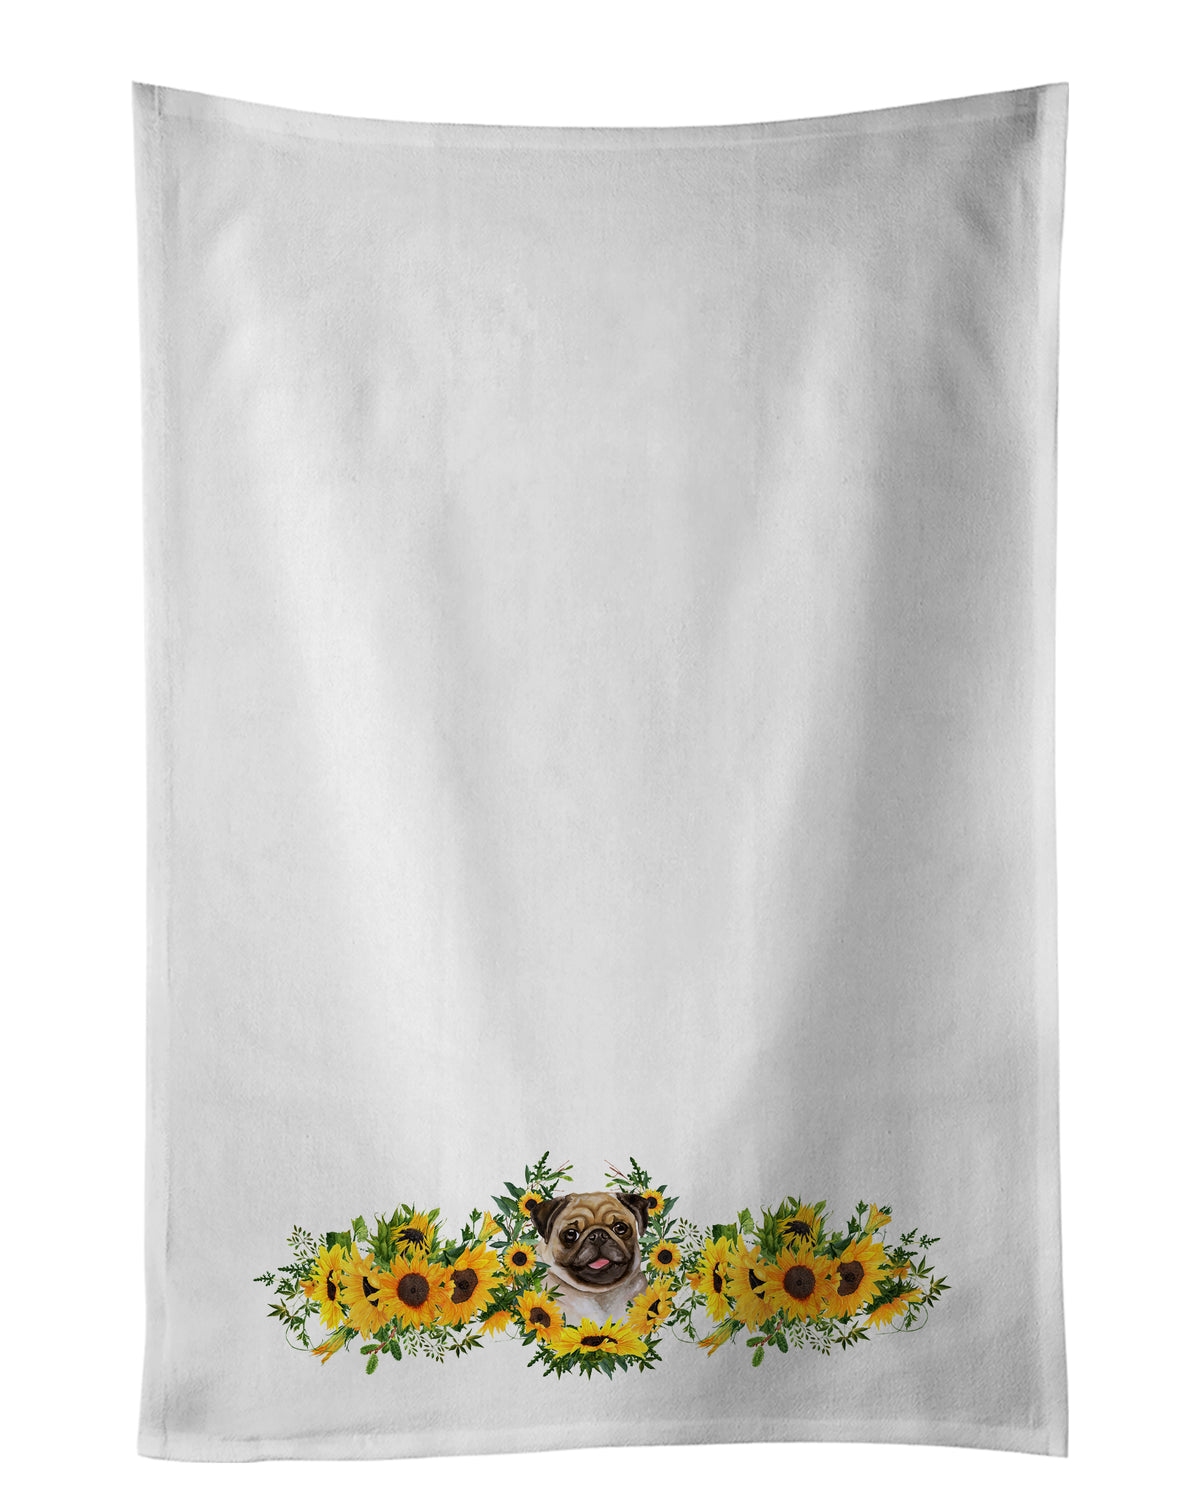 Buy this Fawn Pug in Sunflowers White Kitchen Towel Set of 2